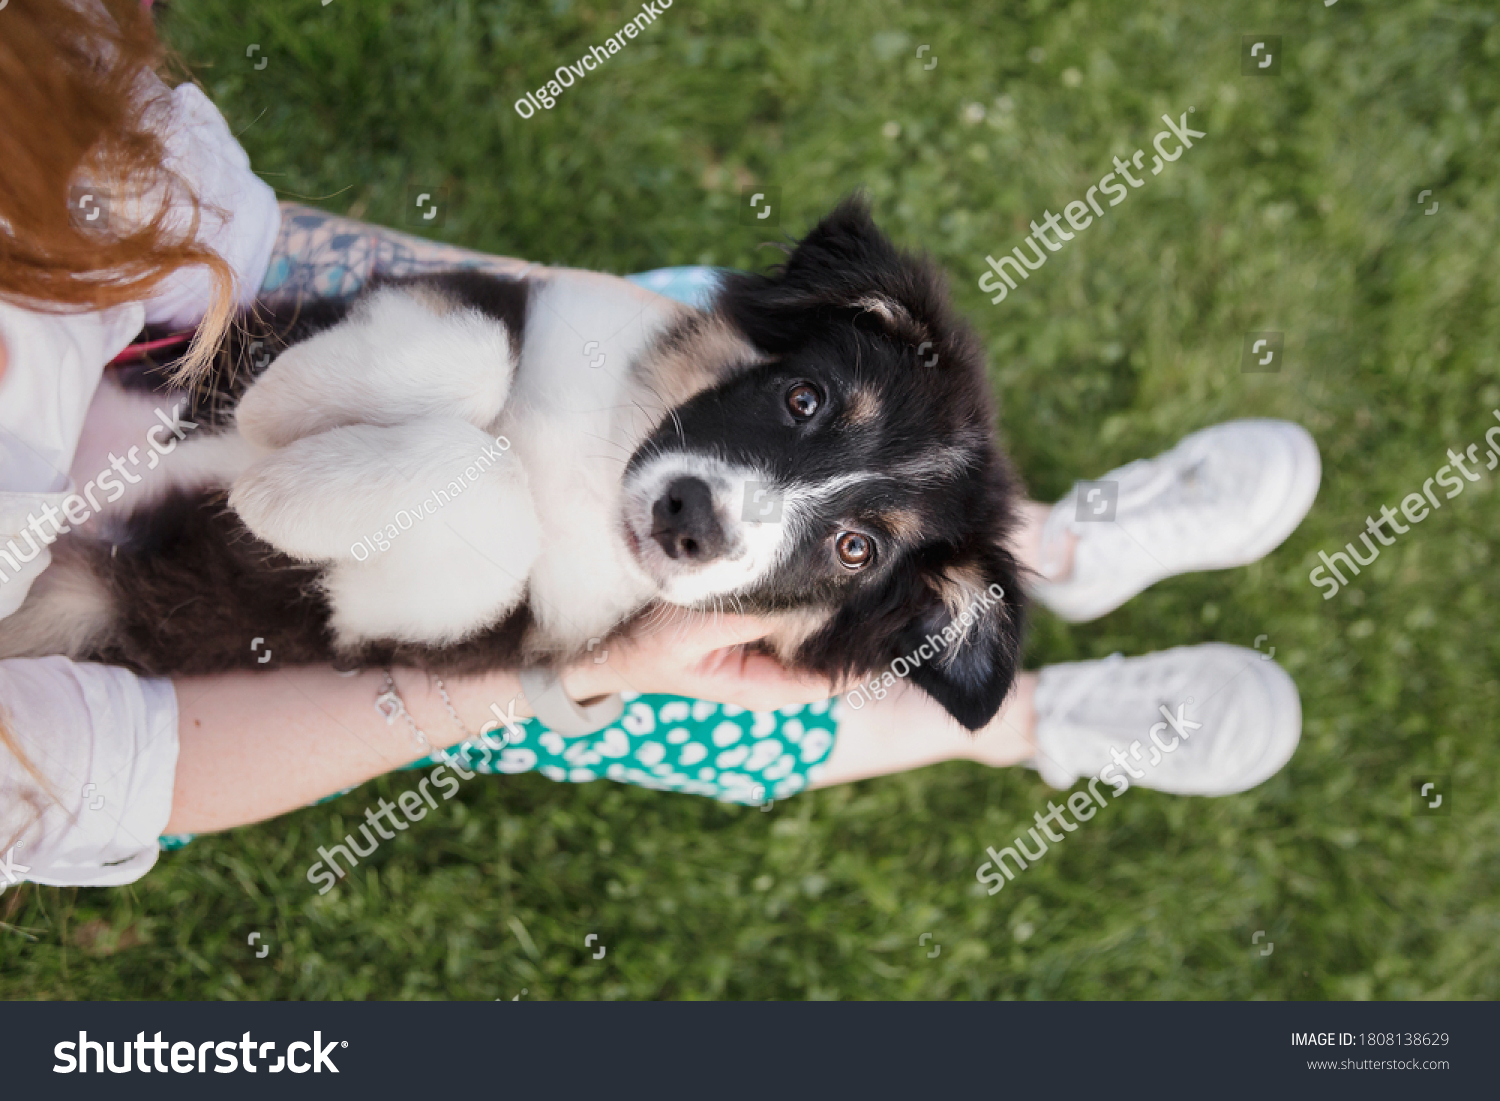 Little dog with owner spend a day at the park playing and having fun #1808138629